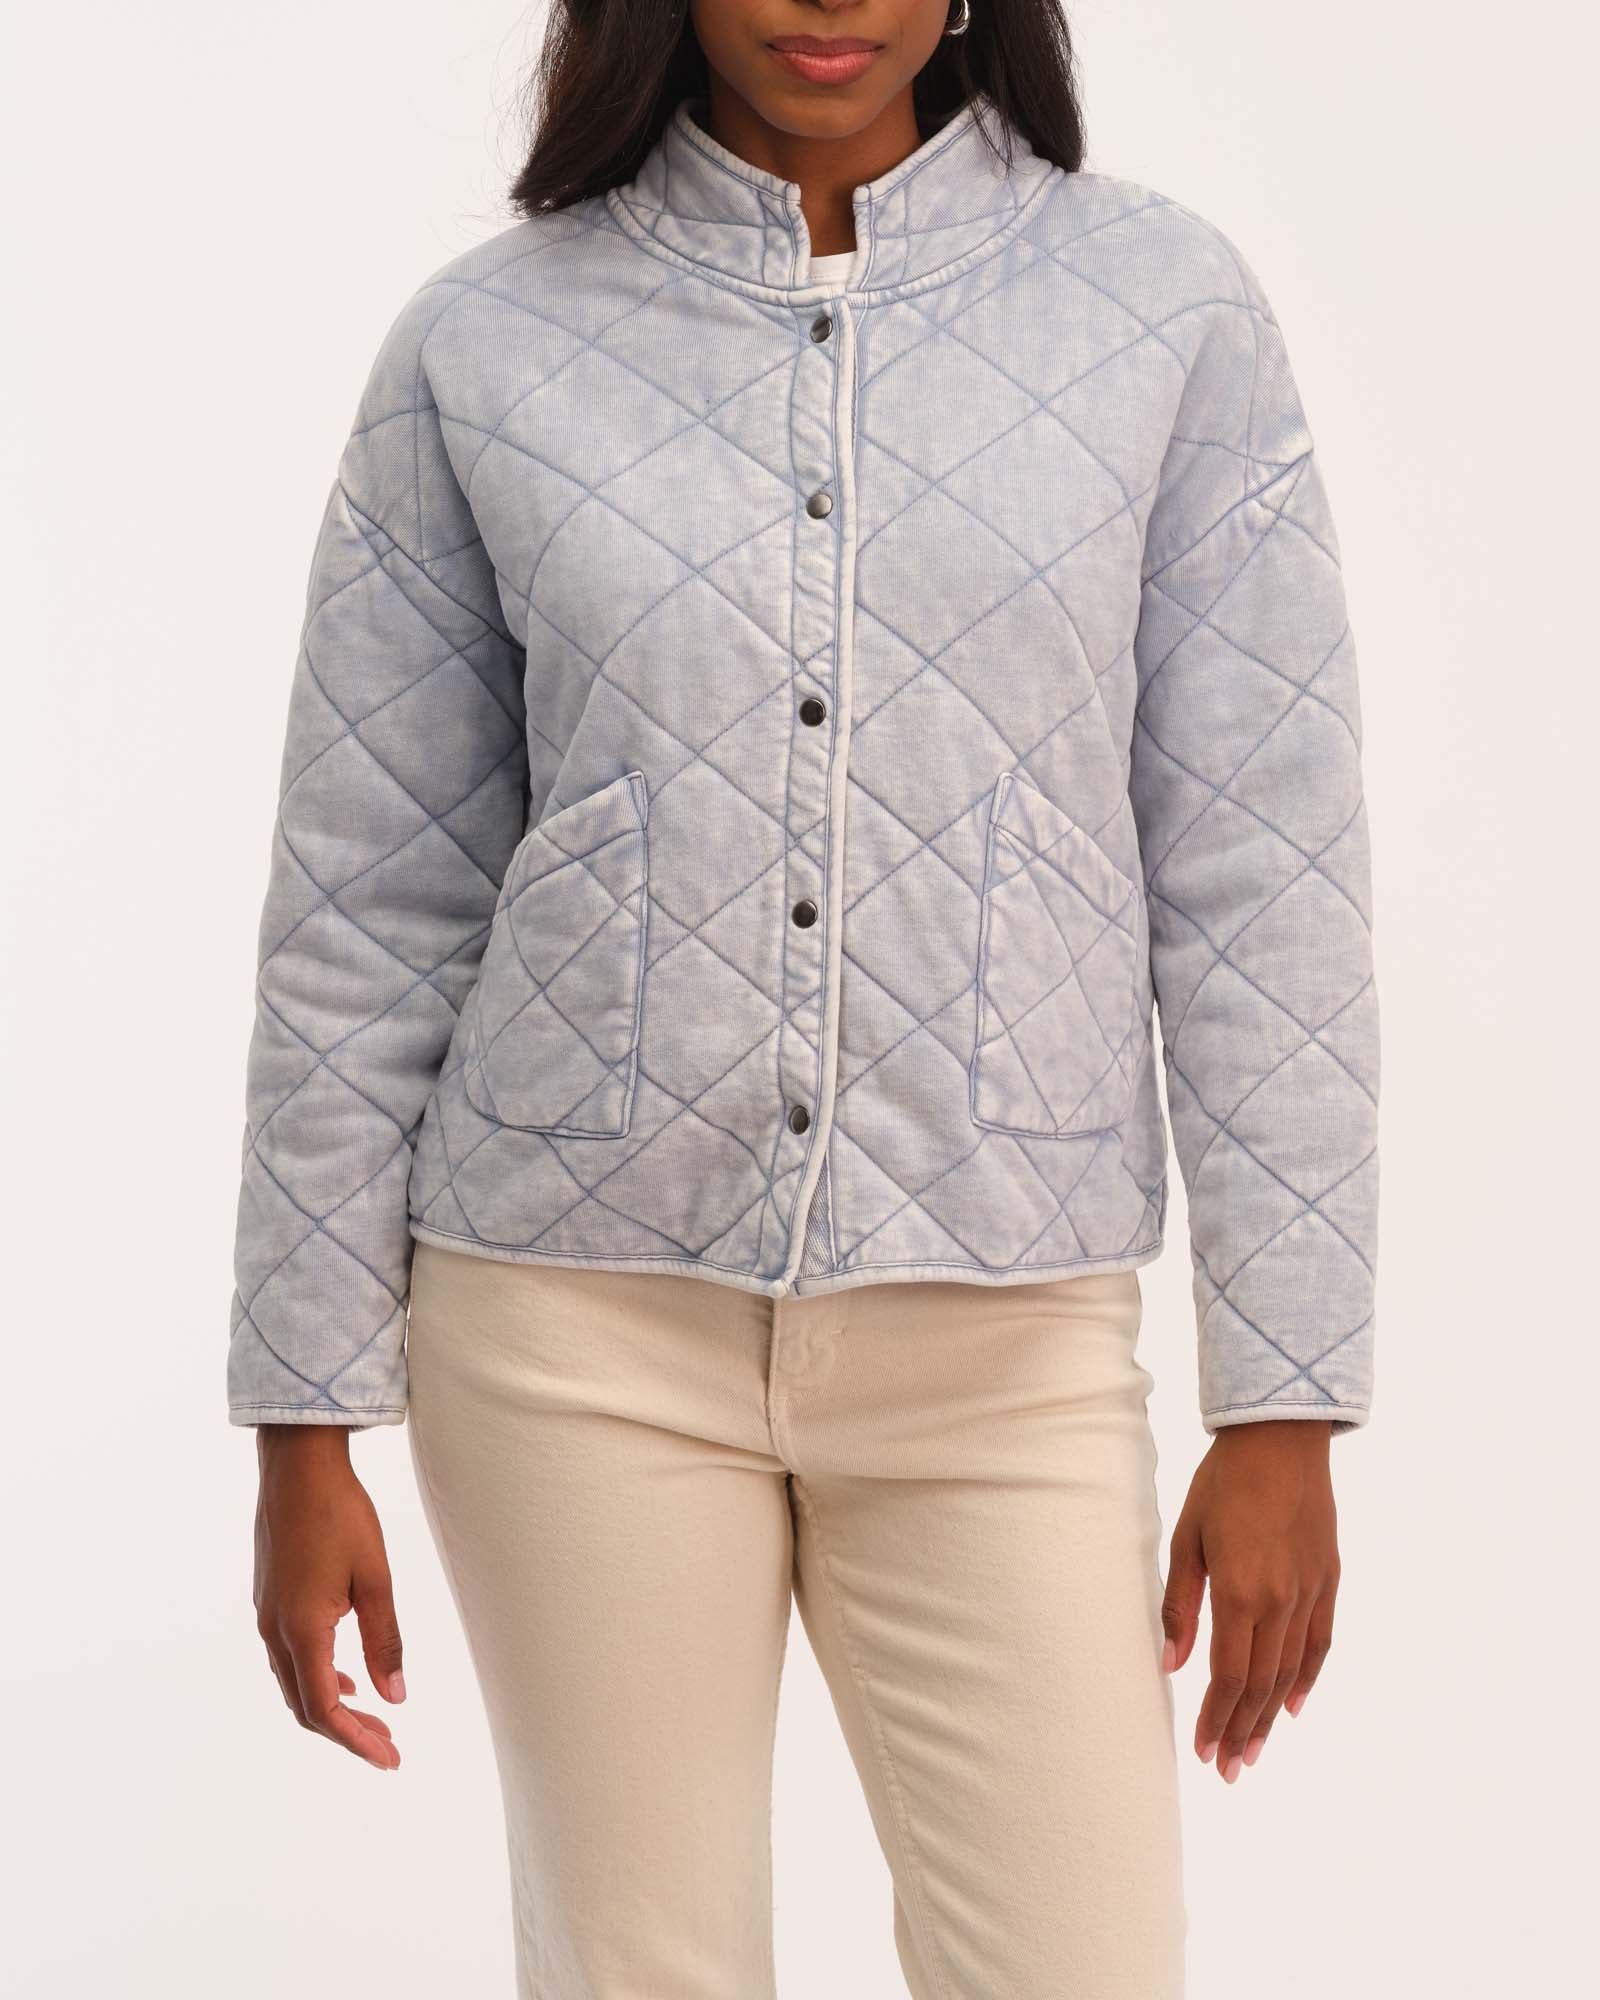 Shop Women's Knit Denim Quilted Jacket | For The Republic | JANE + MERCER